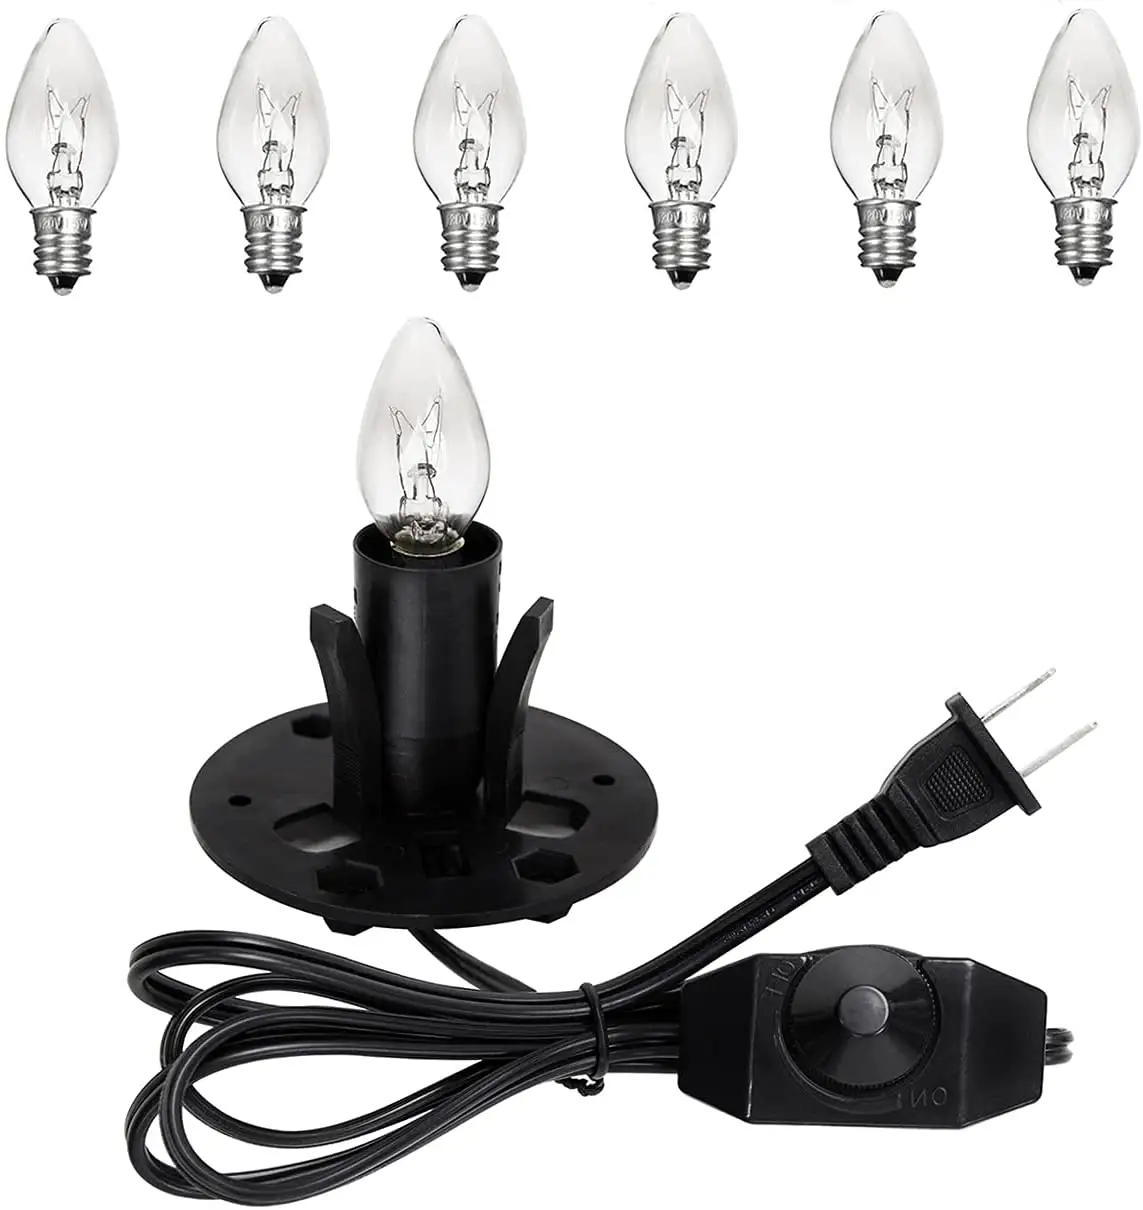 6Ft Original Replacement Himalayan Wire E12 E26 Salt Power With Switch And Holder Dimmer Lamp Cord